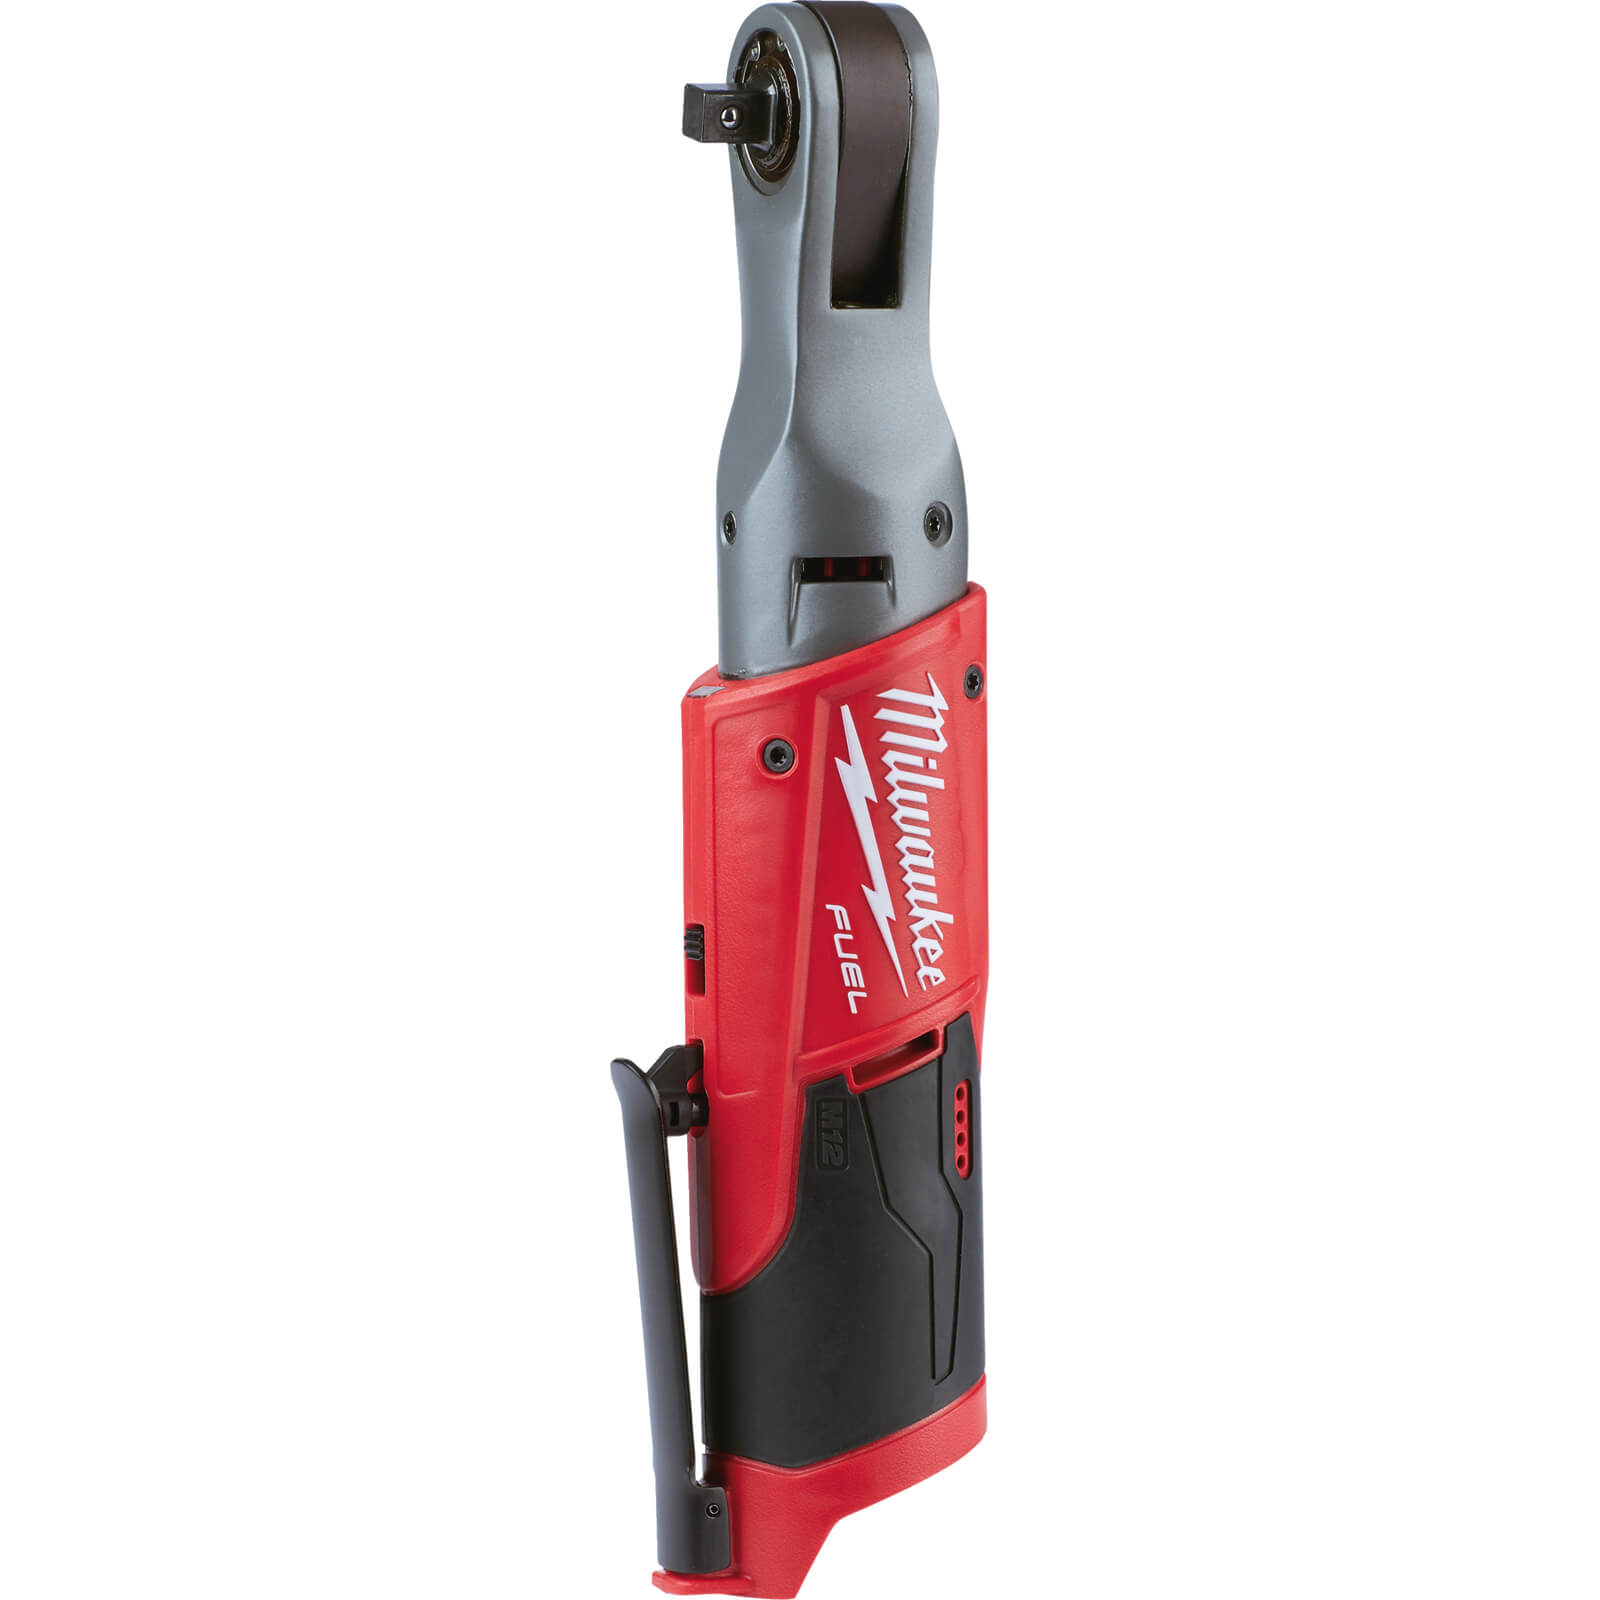 Image of Milwaukee M12 FIR38 Fuel 12v Cordless Brushless 3/8" Drive Ratchet Wrench No Batteries No Charger No Case